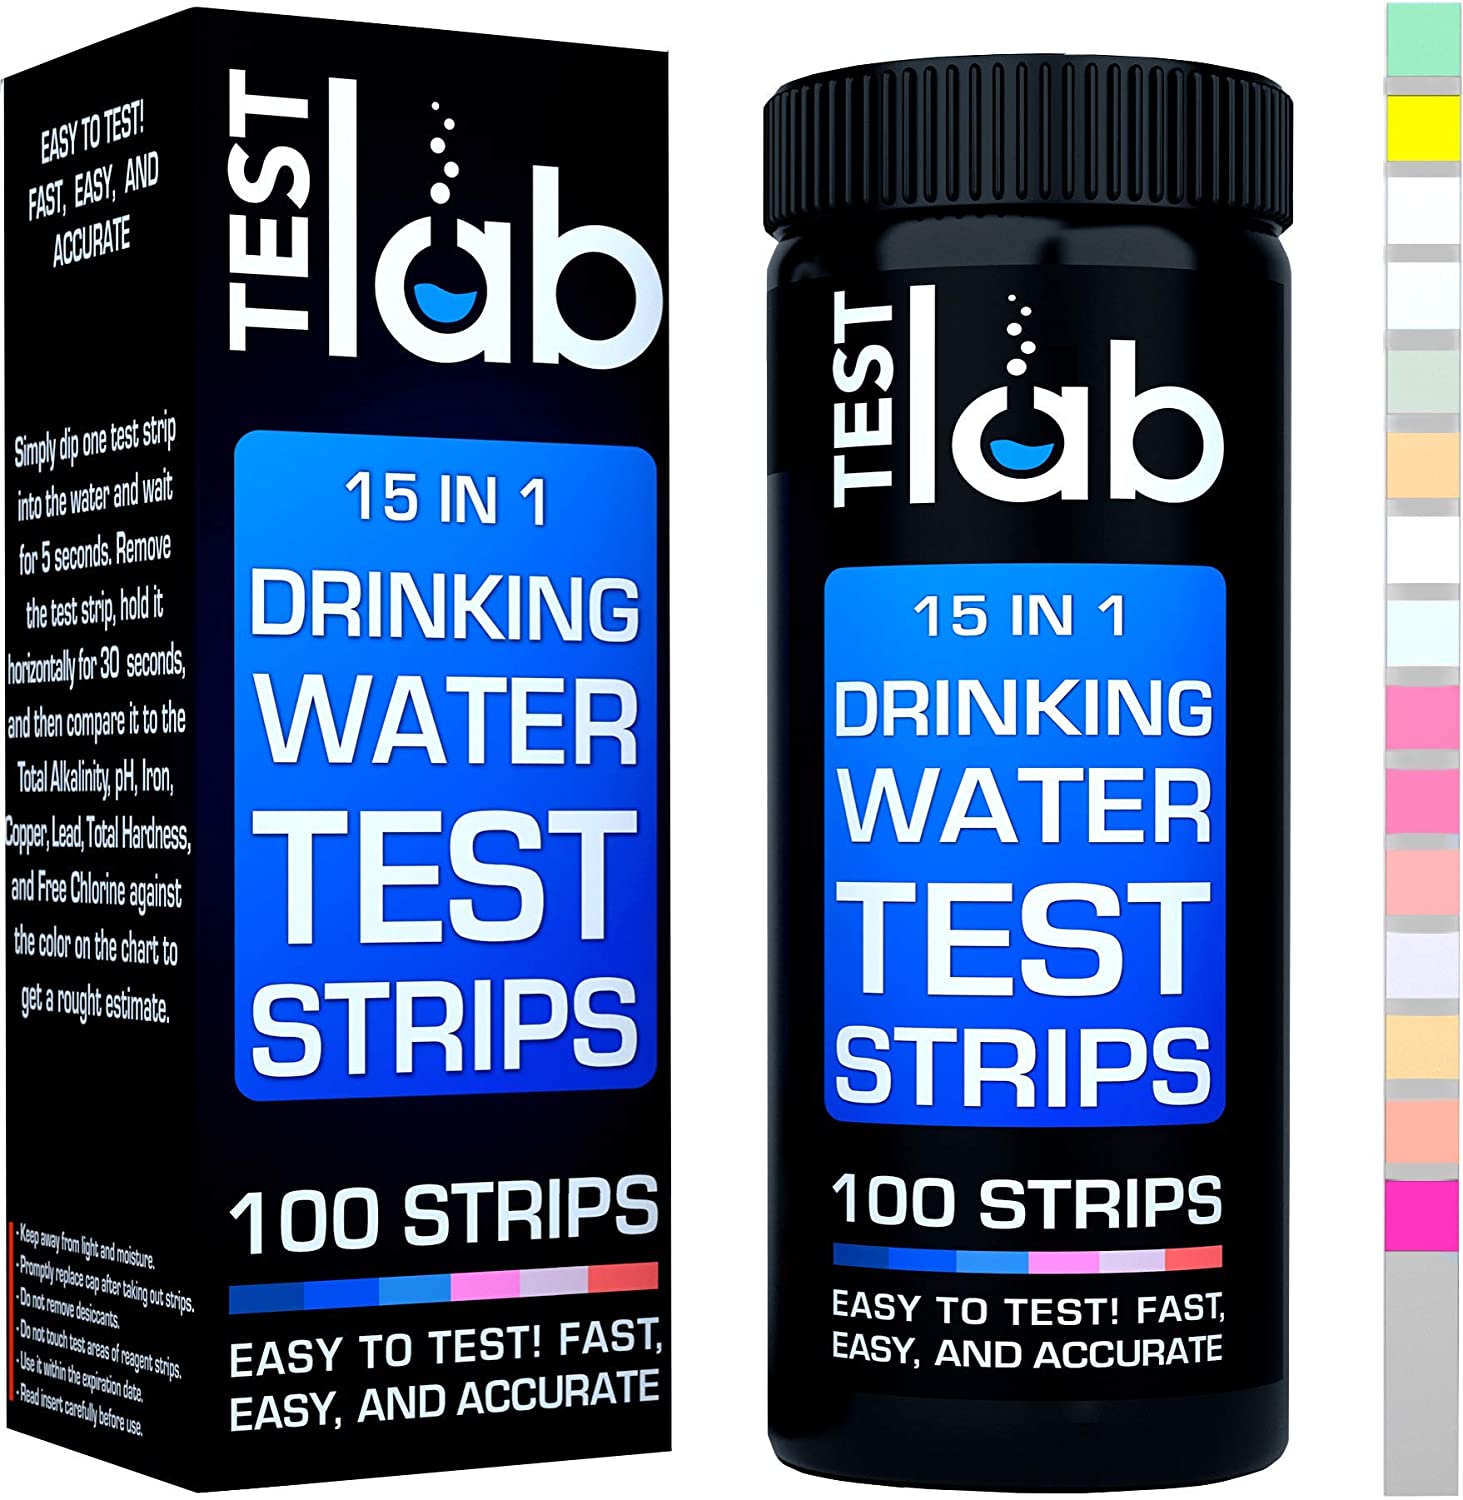 Crystal Water 15-in-1 Drinking Water Test Strips 